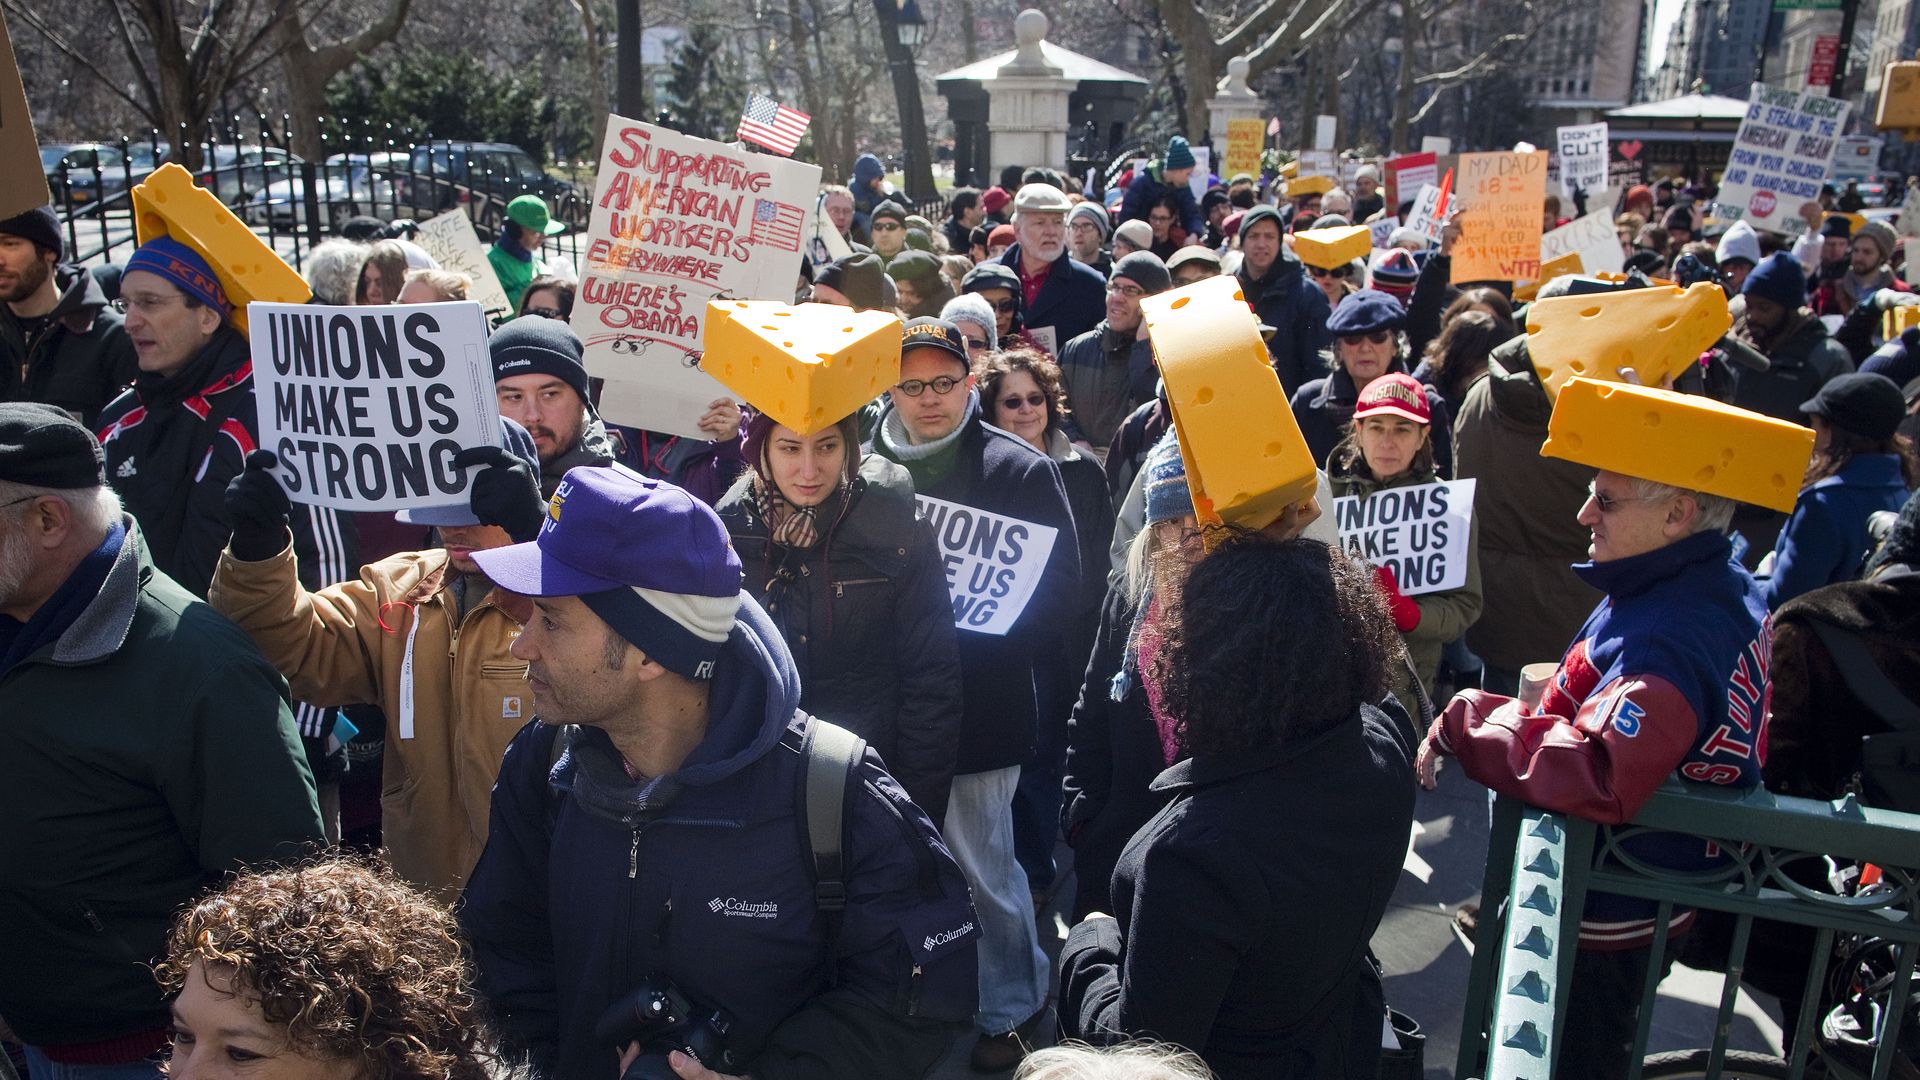 Demonstrators in New York in solidarity with union workers across the country. Photo: Michael Nagle/Getty Images